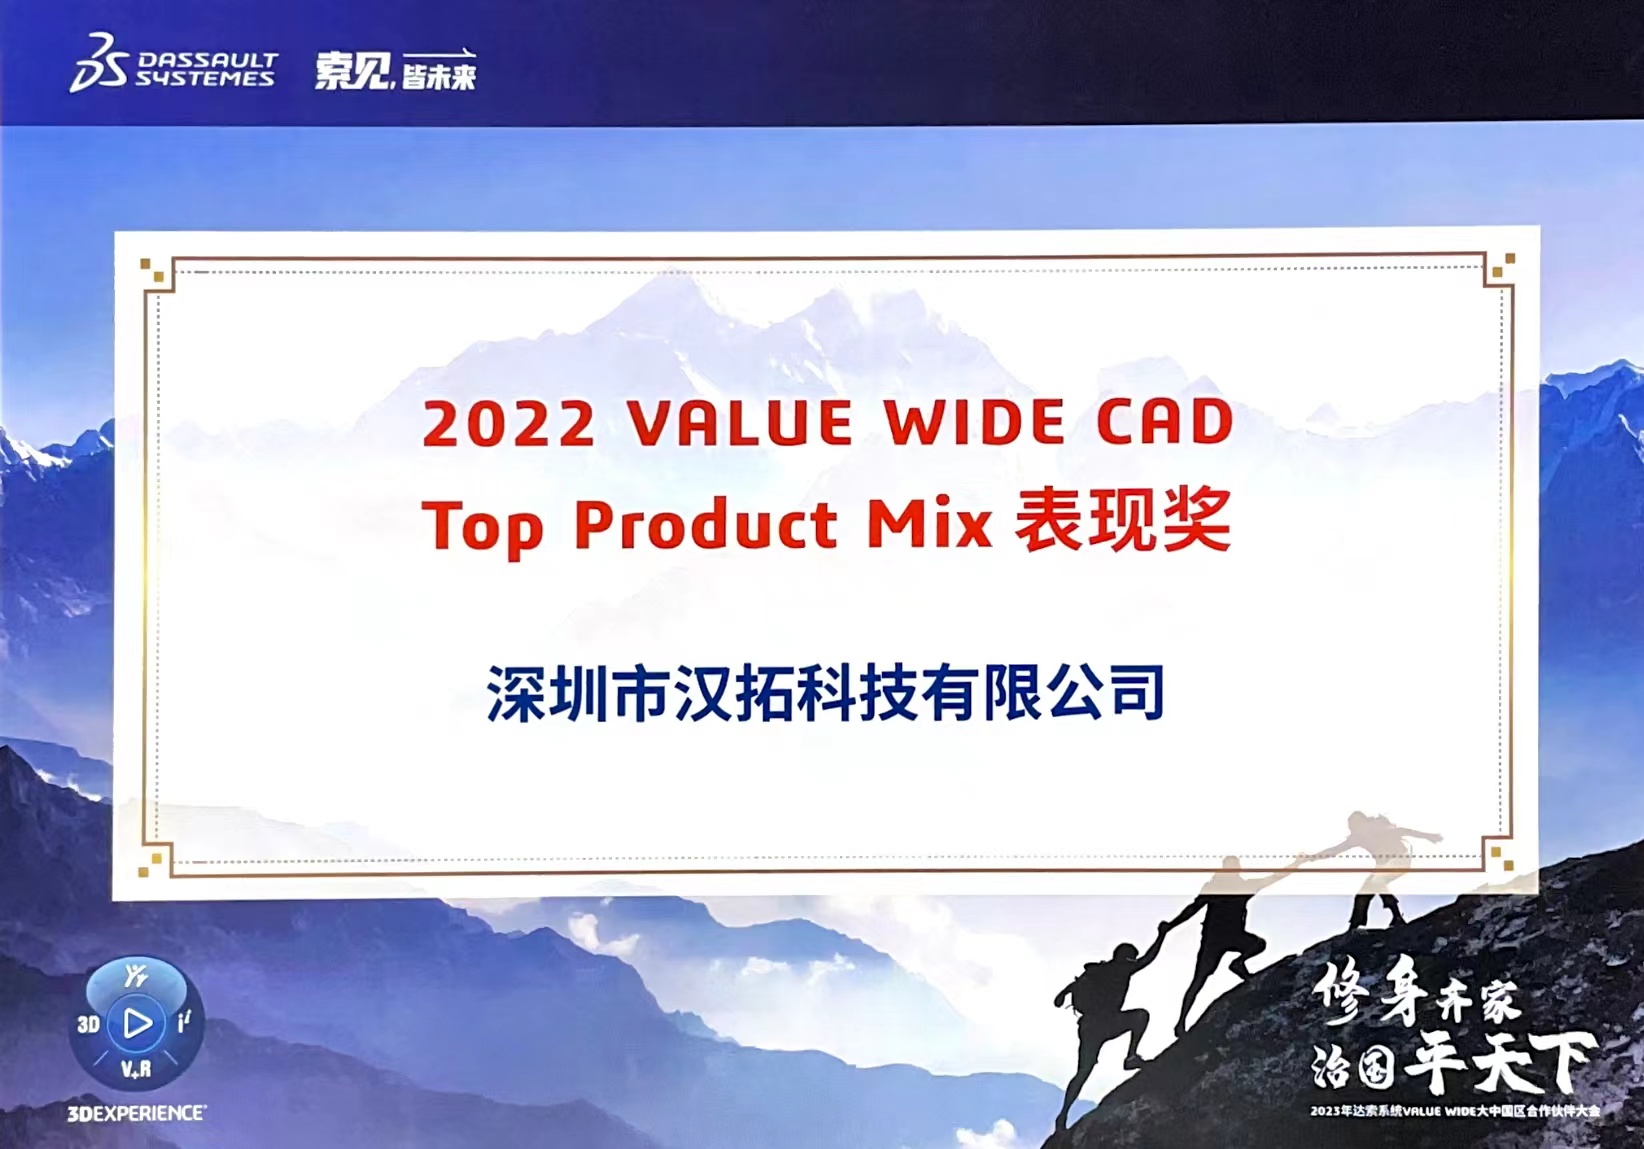 2022 VALUE WIDE CAD Top Product Mix 表现奖